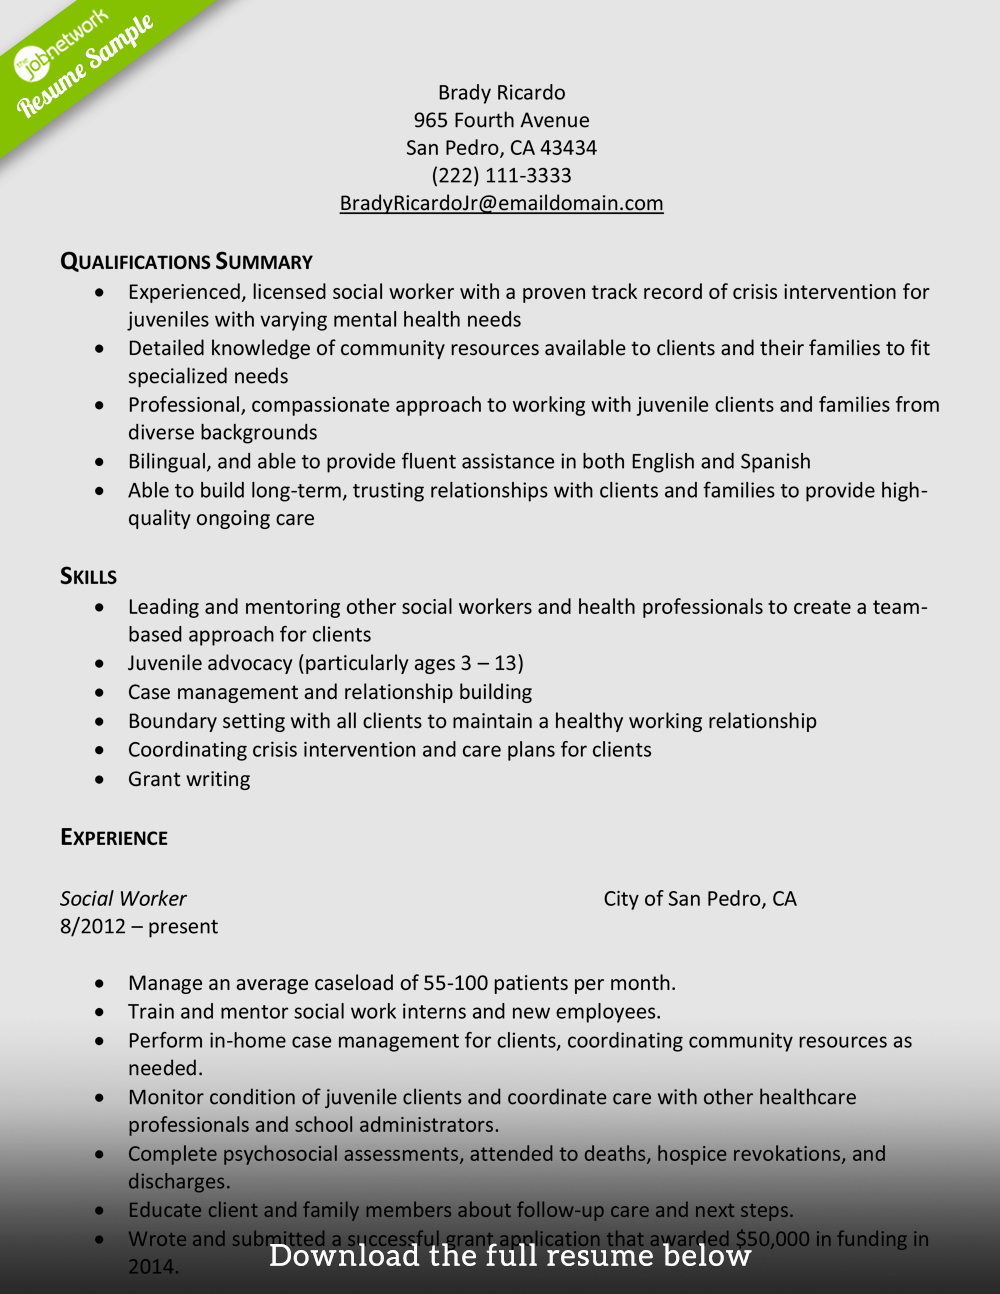 Social Worker Skills for Resume – Perfect Resume format